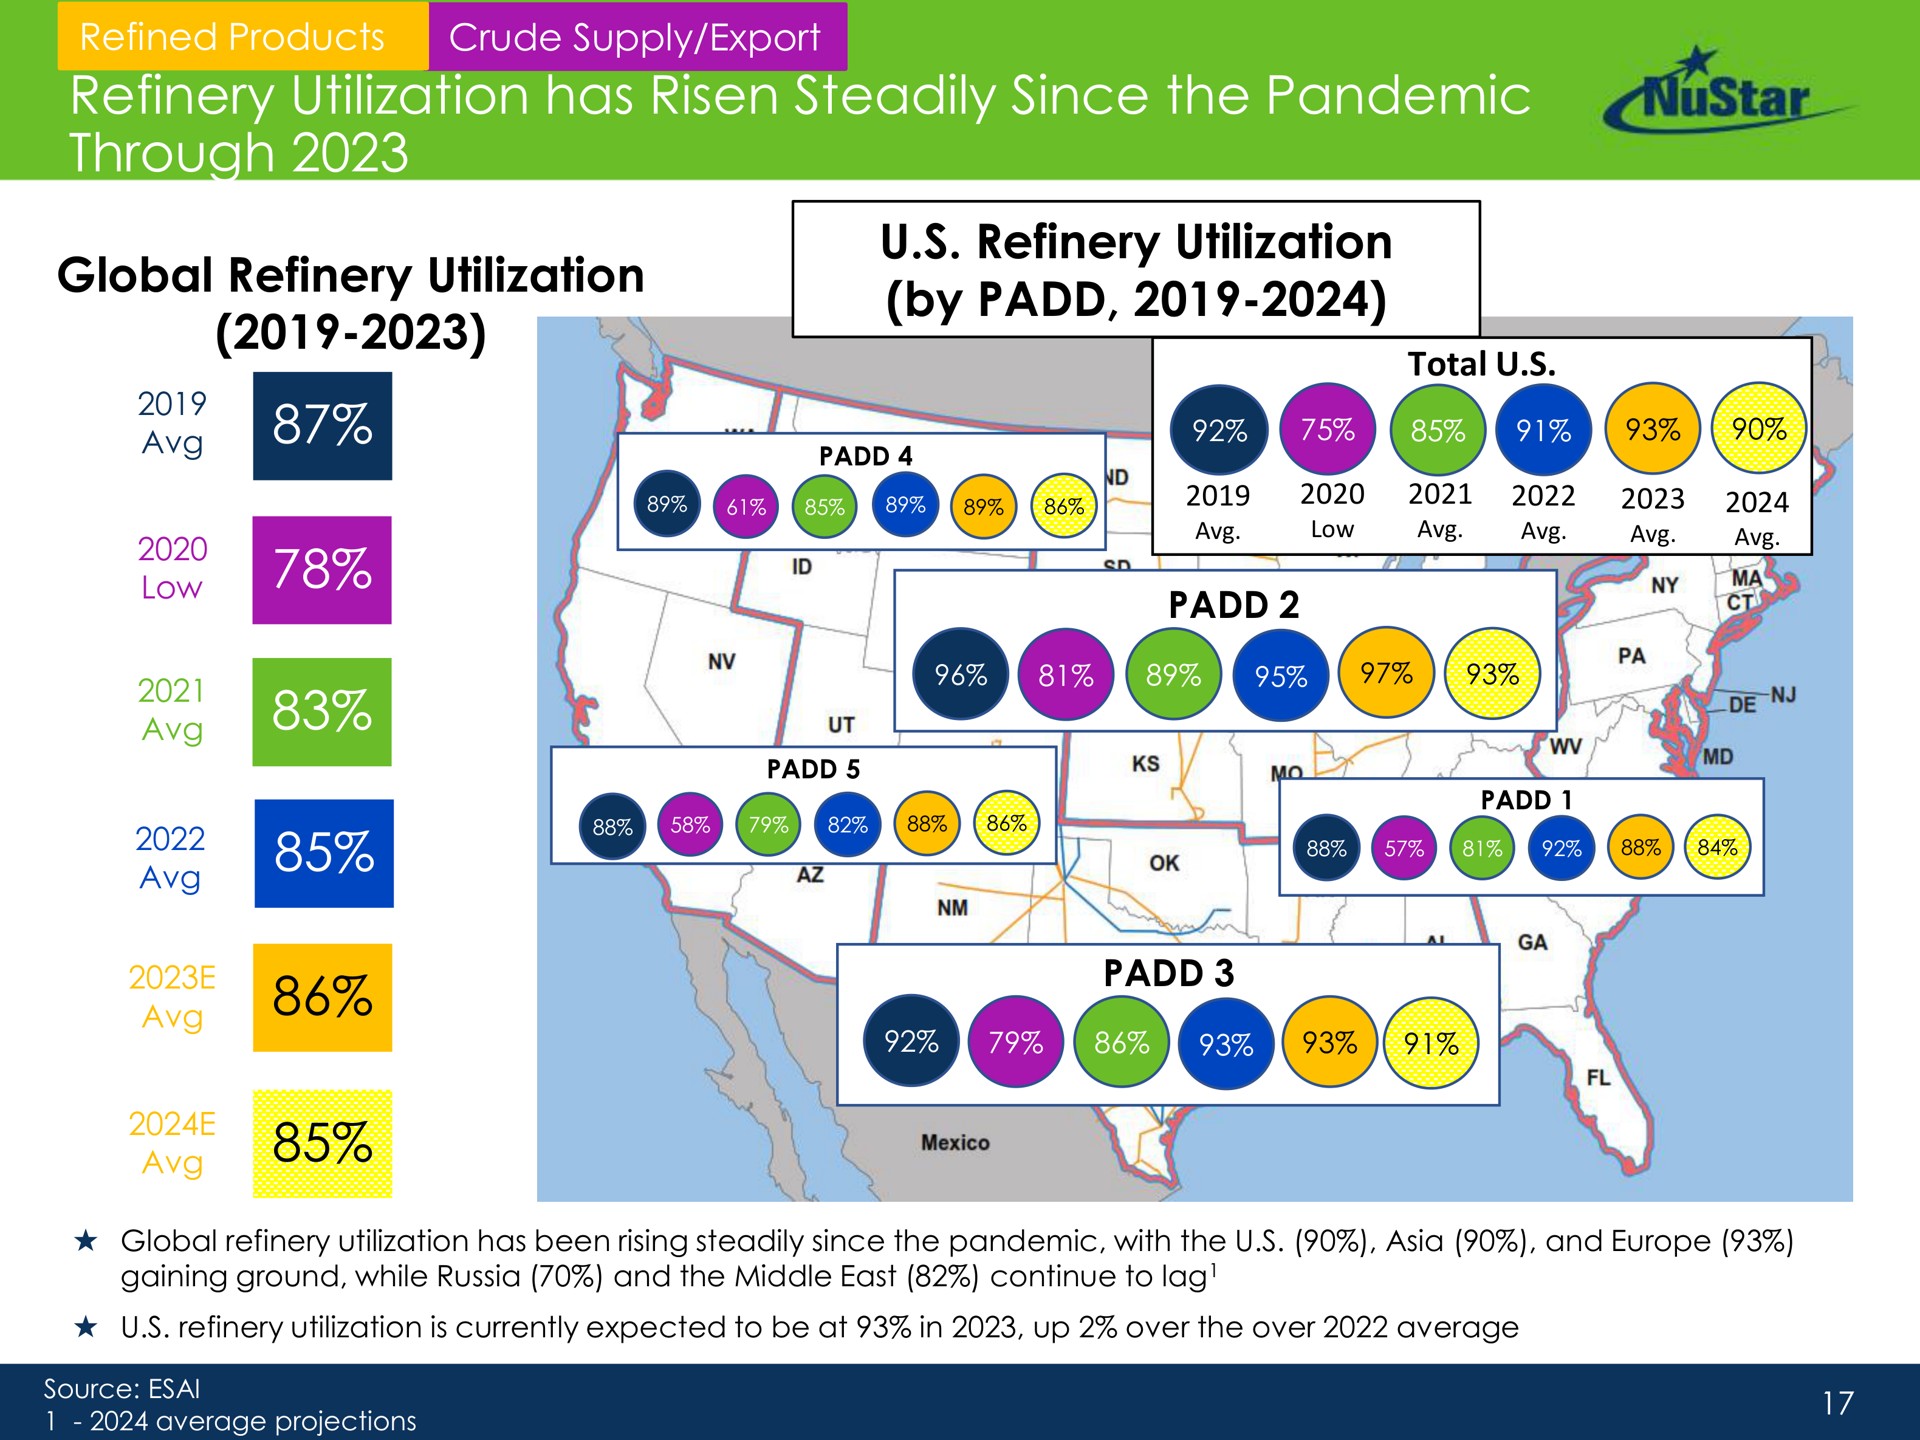 refinery utilization has risen steadily since the pandemic through global refinery utilization refinery utilization by | NuStar Energy